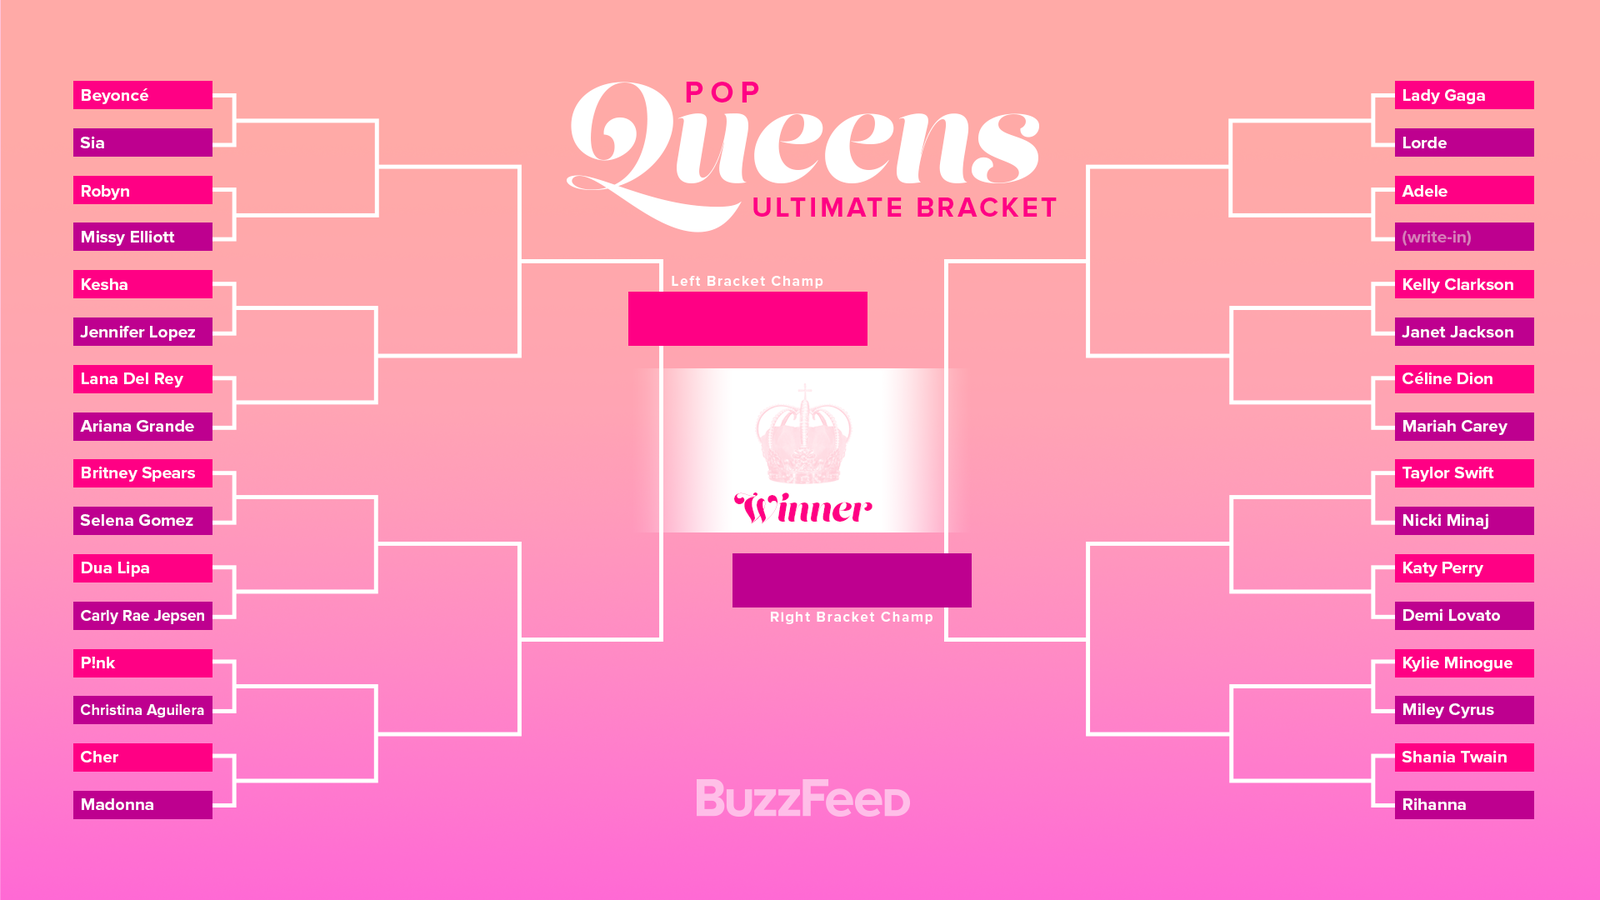 Can You Fill Out This Pop Queen March Madness Bracket Without Gay Gasping?....